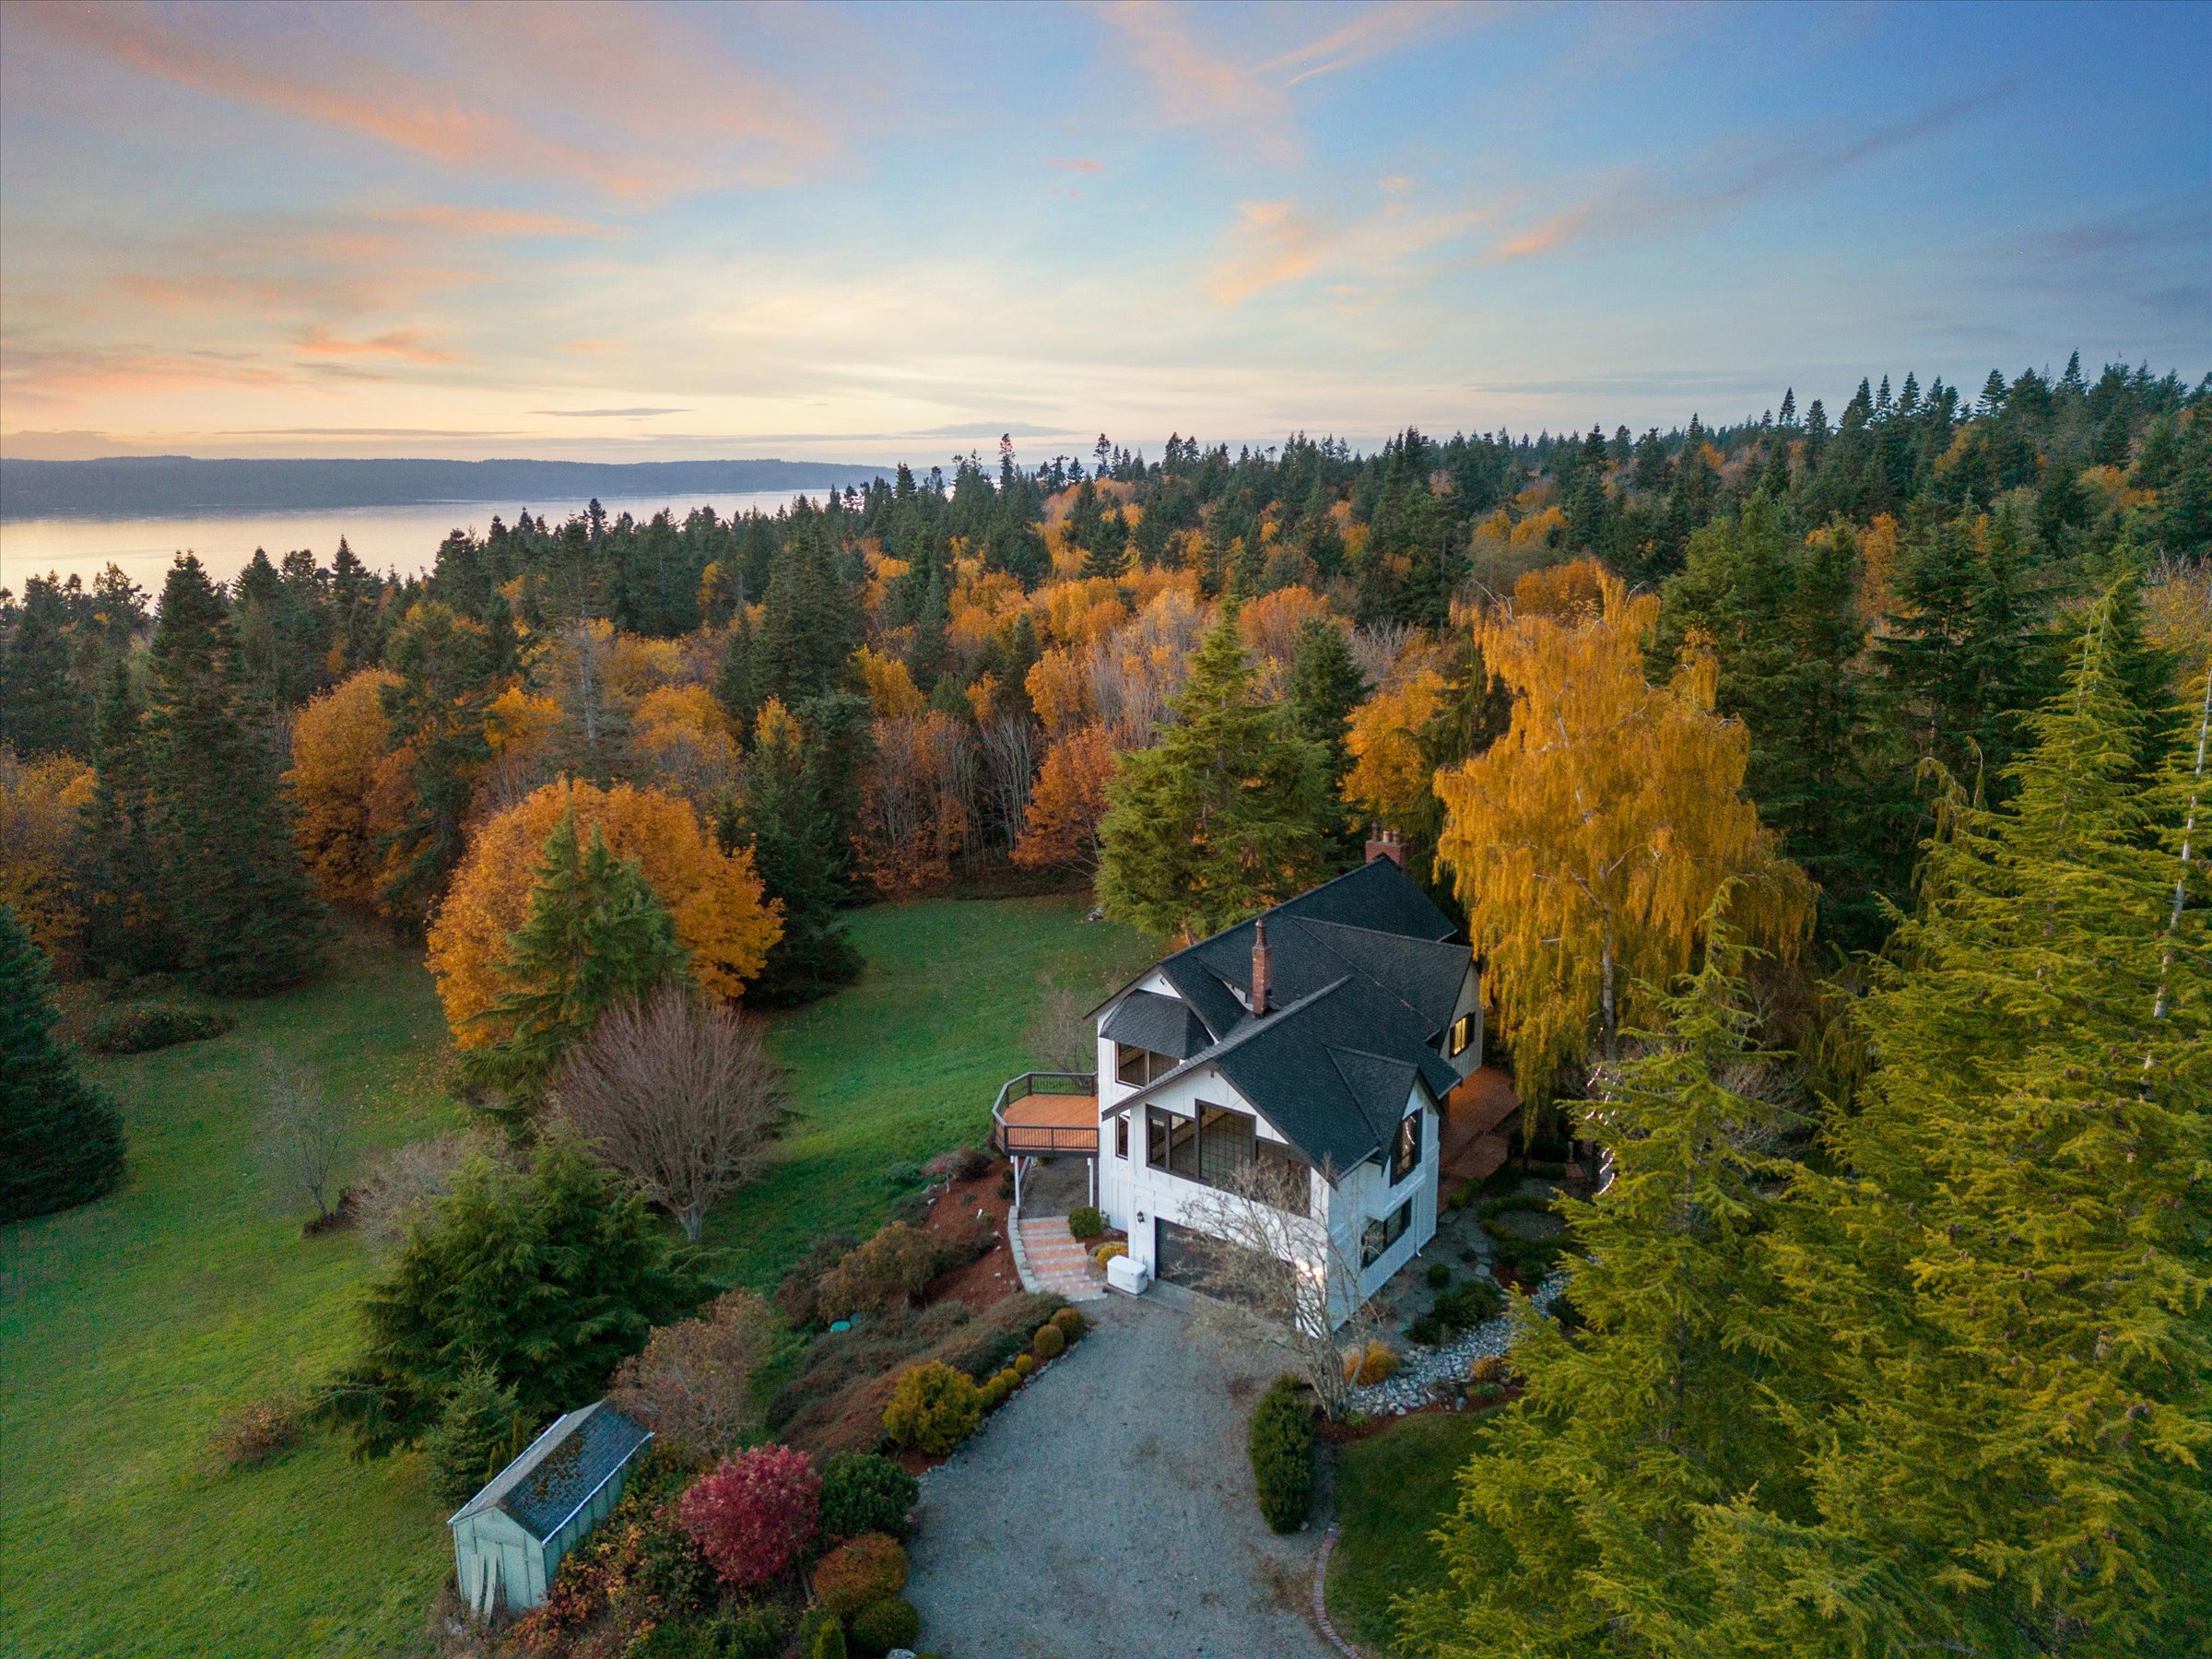 View of Camano Island home surrounded by trees and a view of the Puget Sound